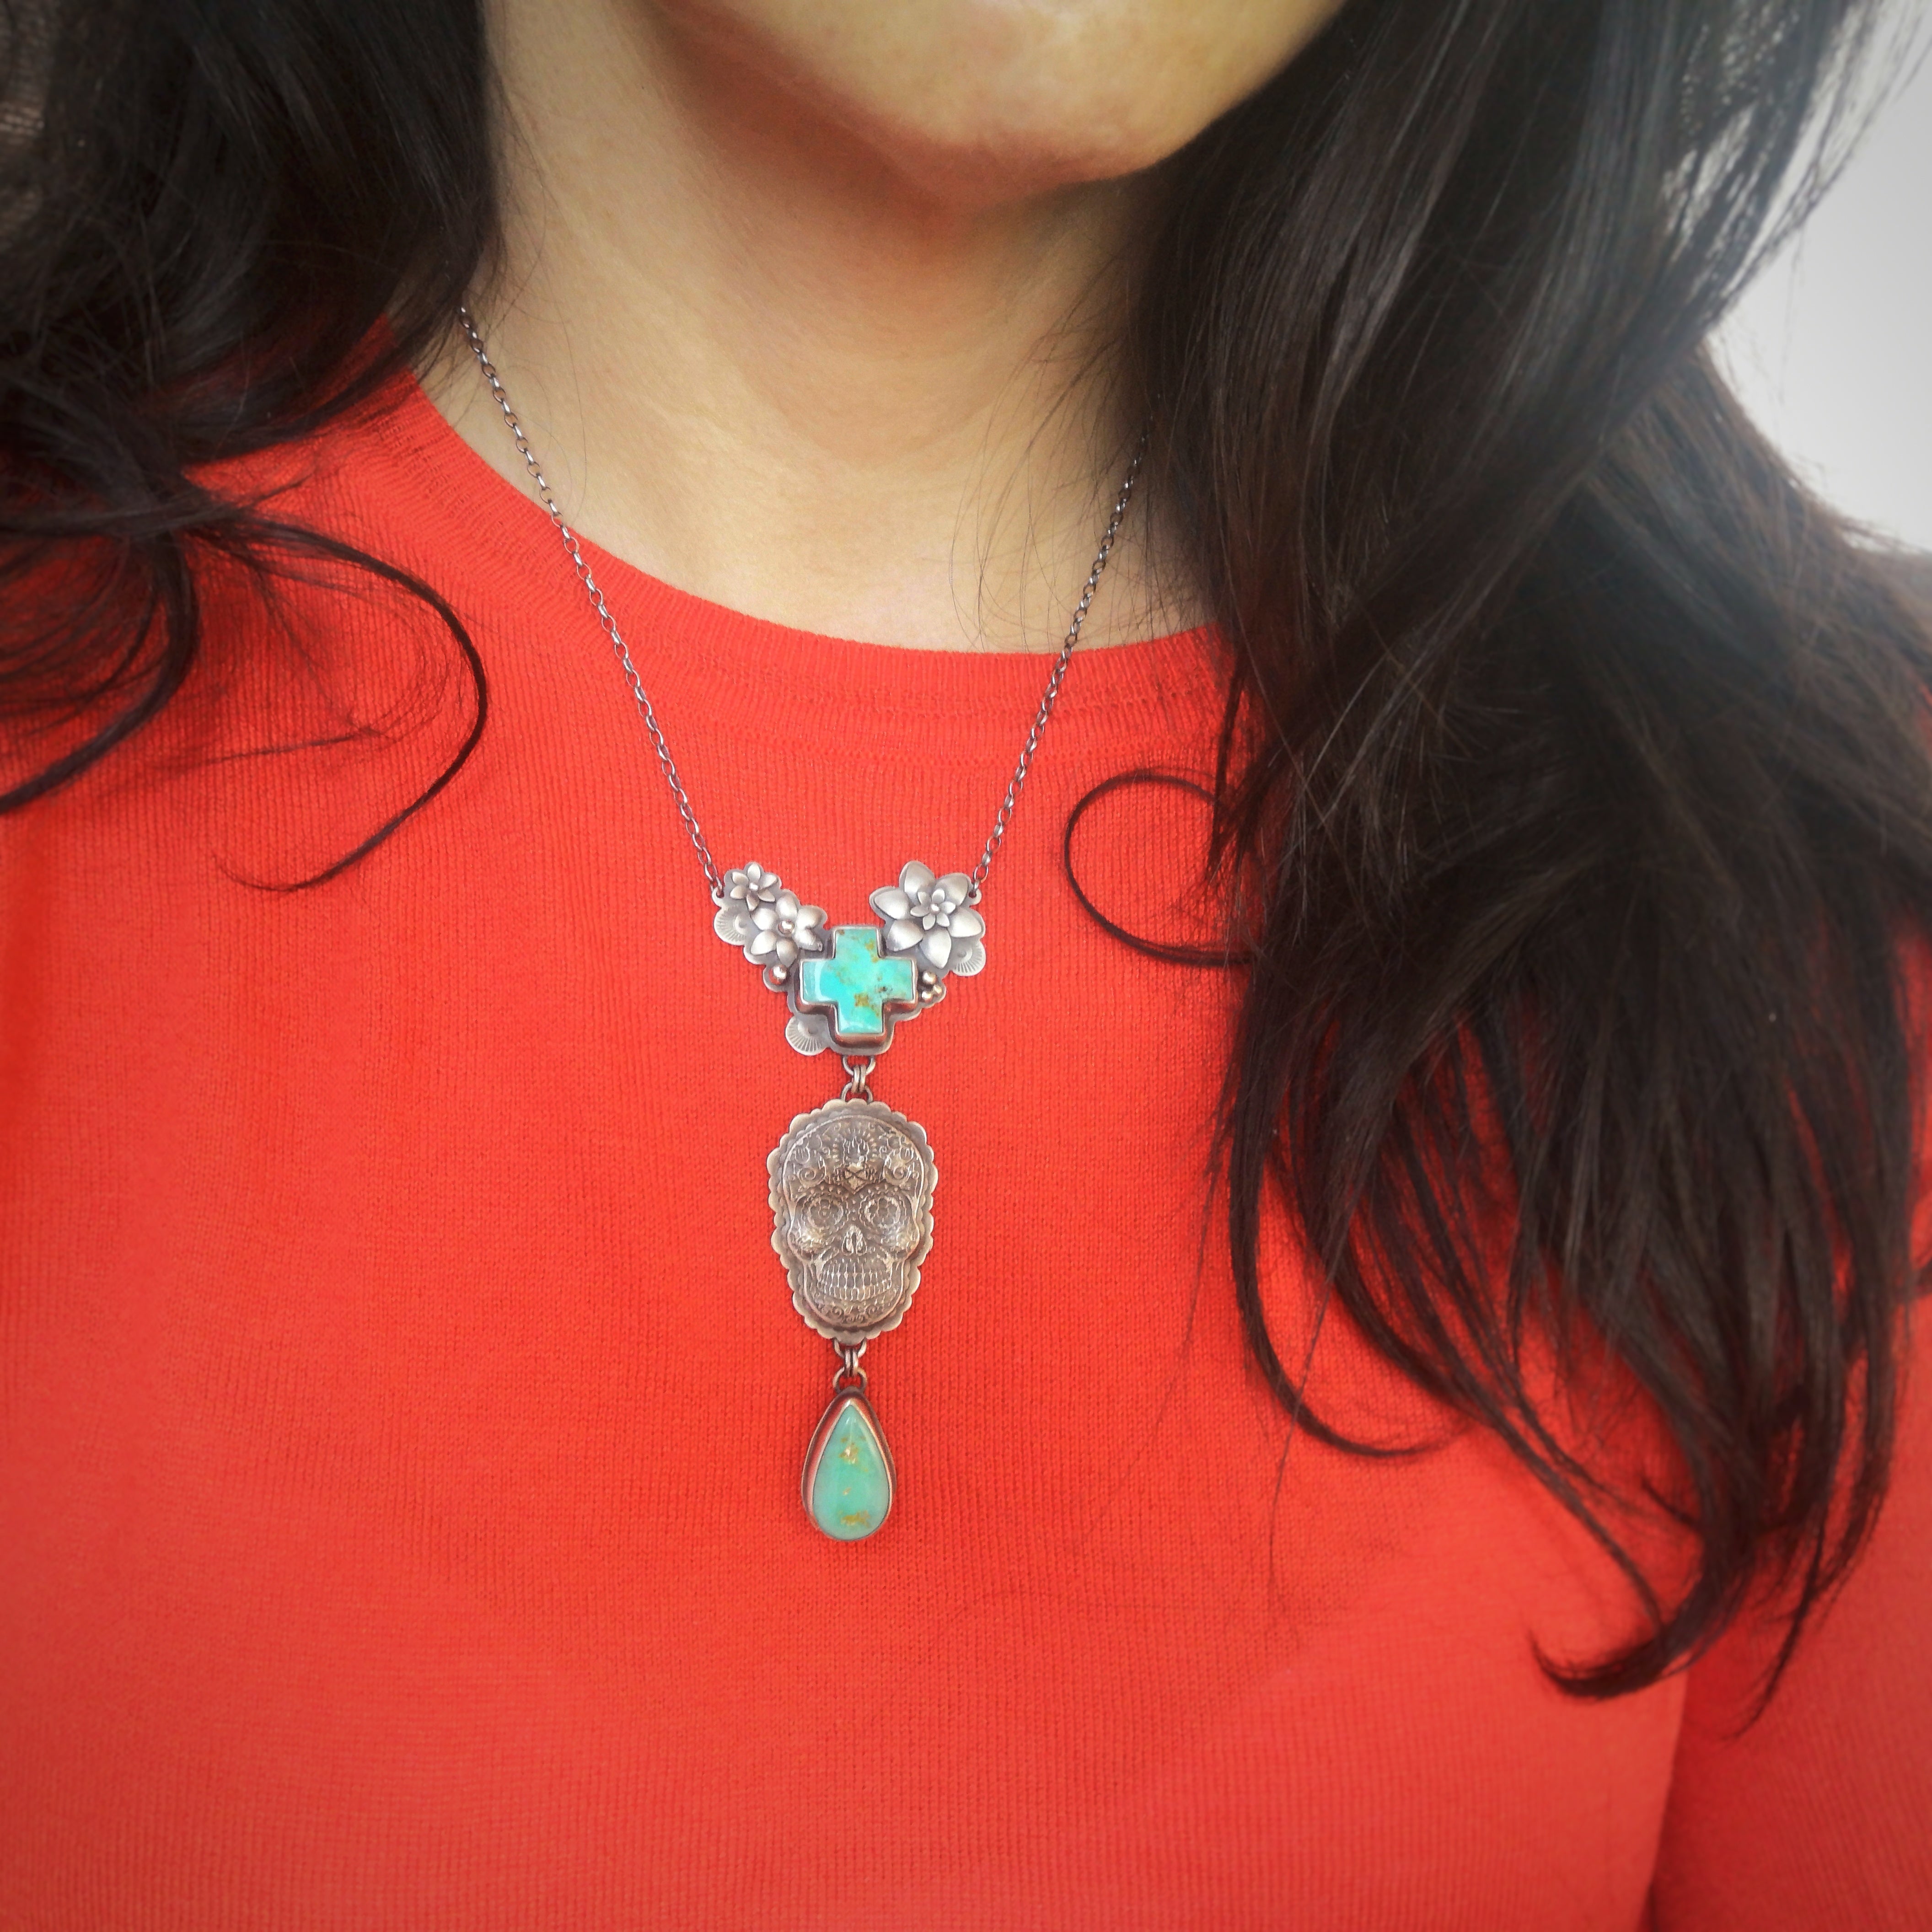 Sugar Skull Necklace -  Turquoise Cross and Royston Drop